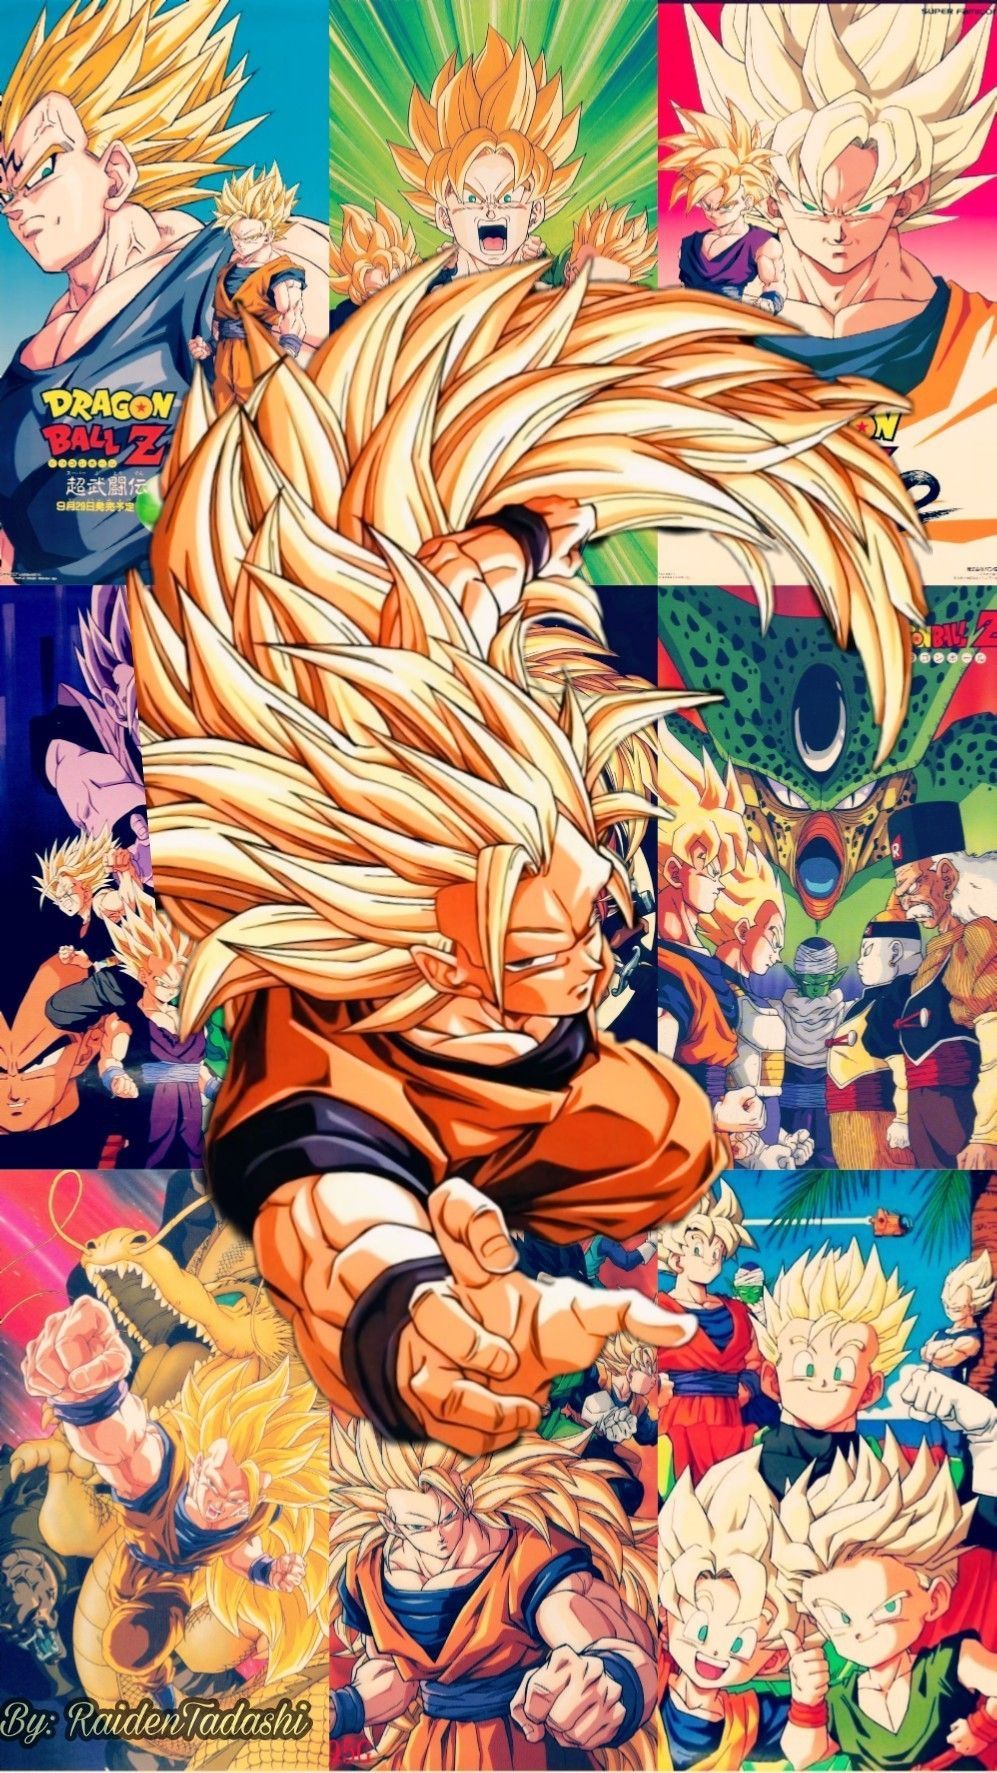 Dragon Ball wallpaper (with posters from 90's in background) made by RaidenTadashi. Dragon ball art, Anime dragon ball super, Anime dragon ball